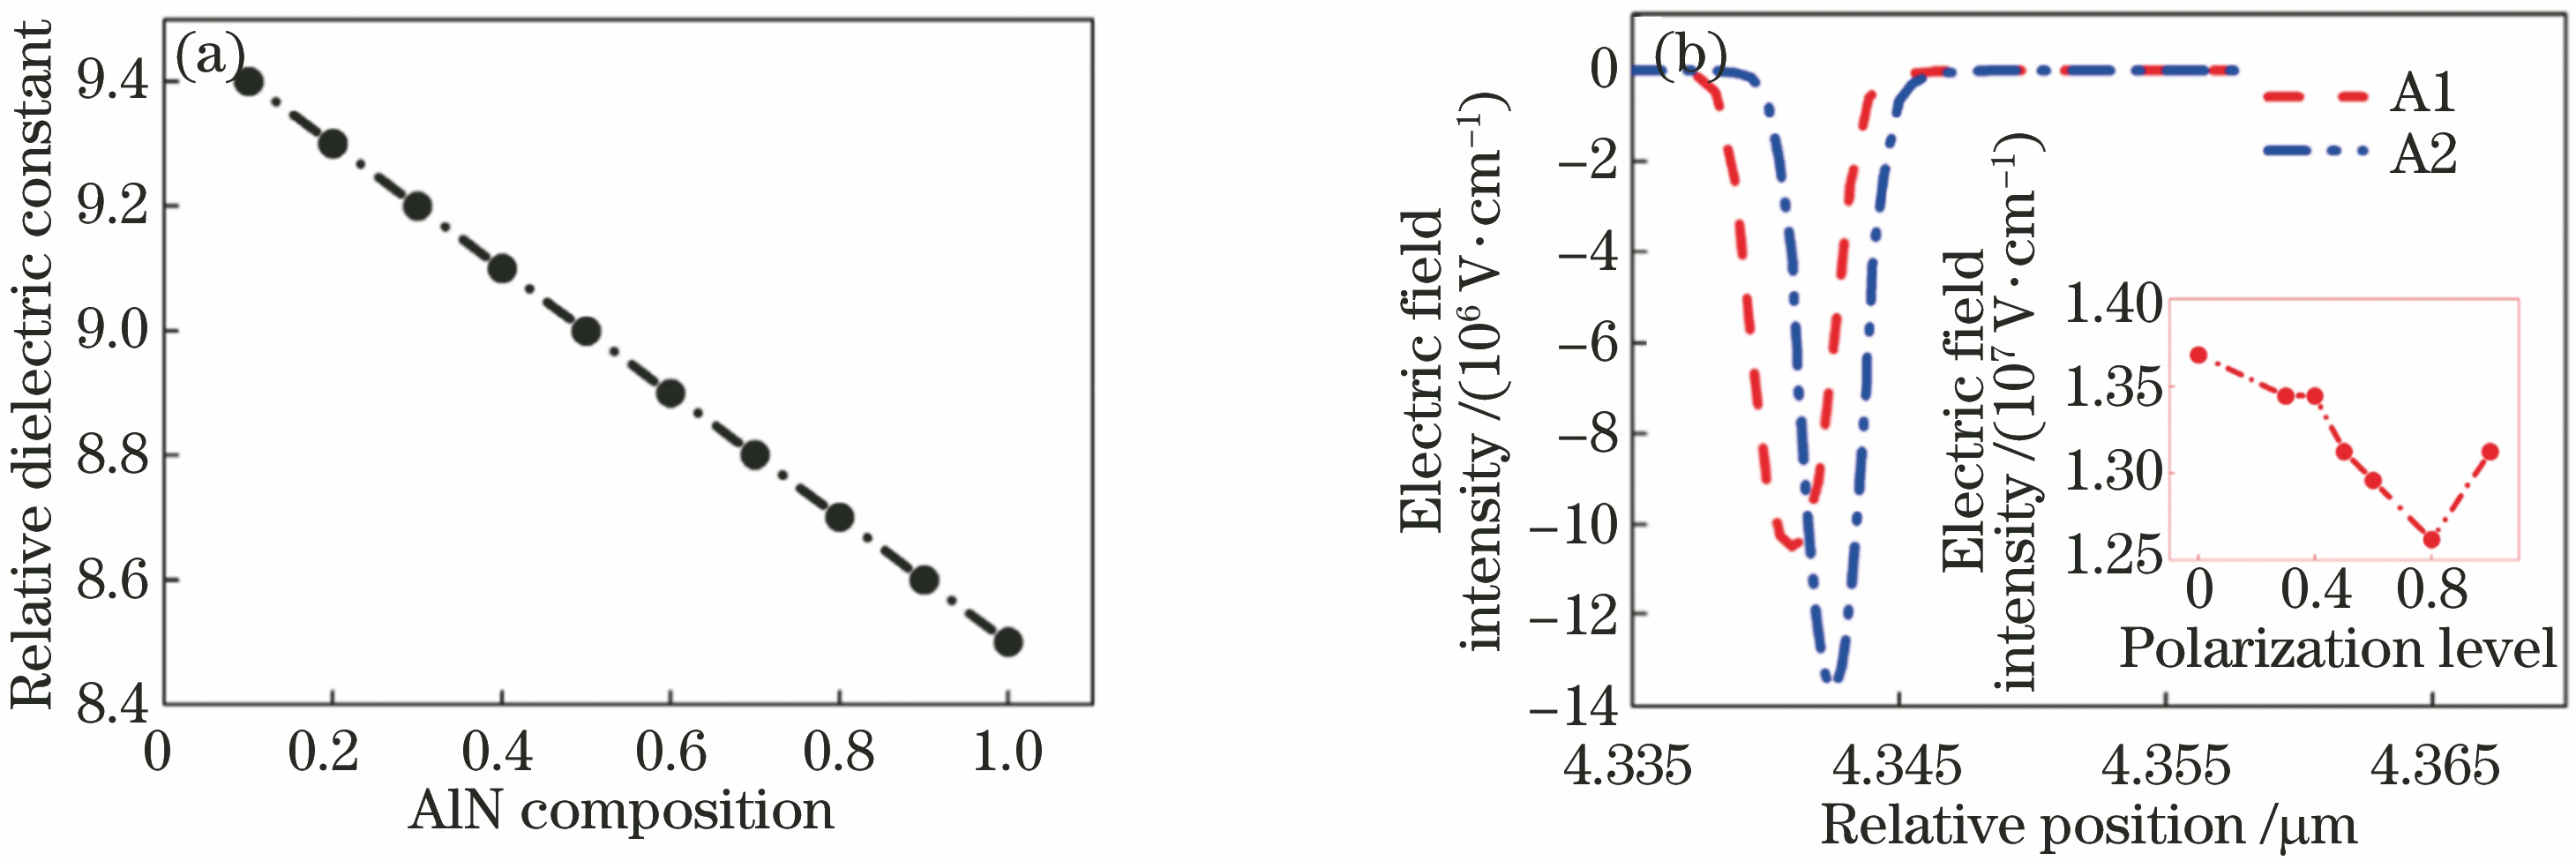 Simulation results. (a) Relative dielectric constant of AlxGa1-xN layer versus AlN composition; (b) electric fields in tunneling regions for devices A1 and A2 at equilibrium (Inset shows peak field intensity versus polarization level). Reproduced from Ref. [57] with permission of Wiley